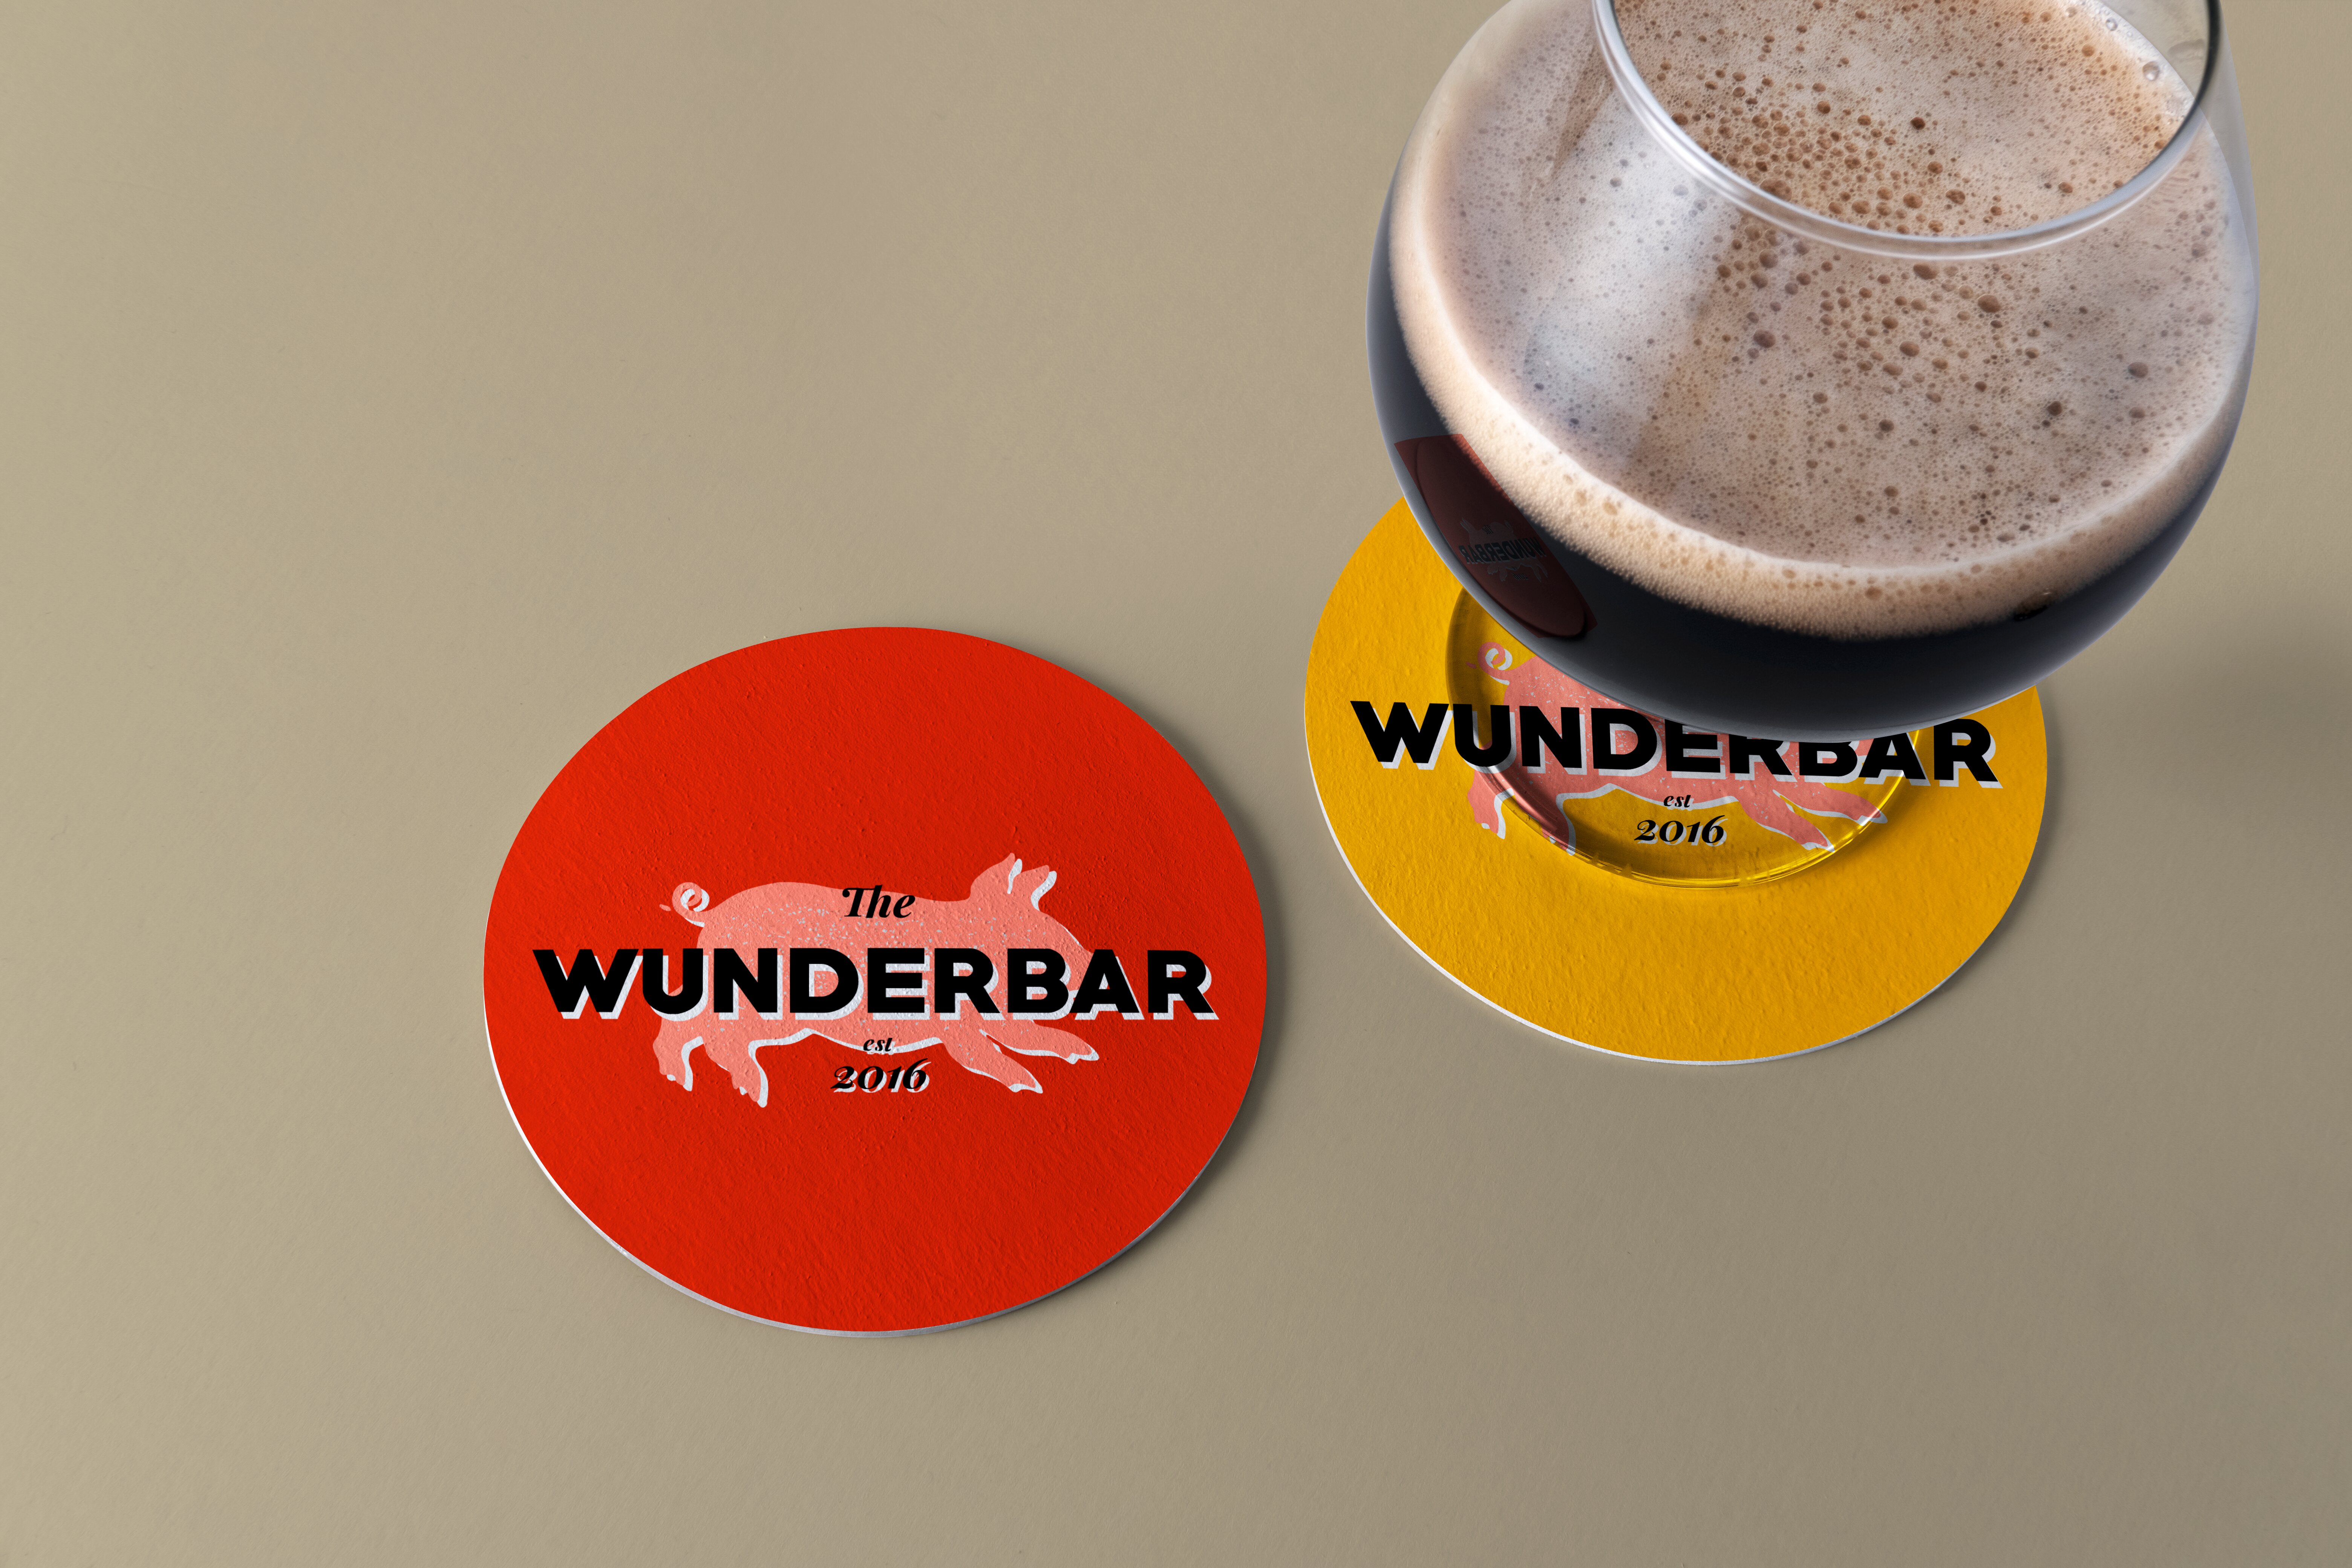 A beer glass with 2 beer coasters displaying the Wunderbar logo. One red and one yellow.